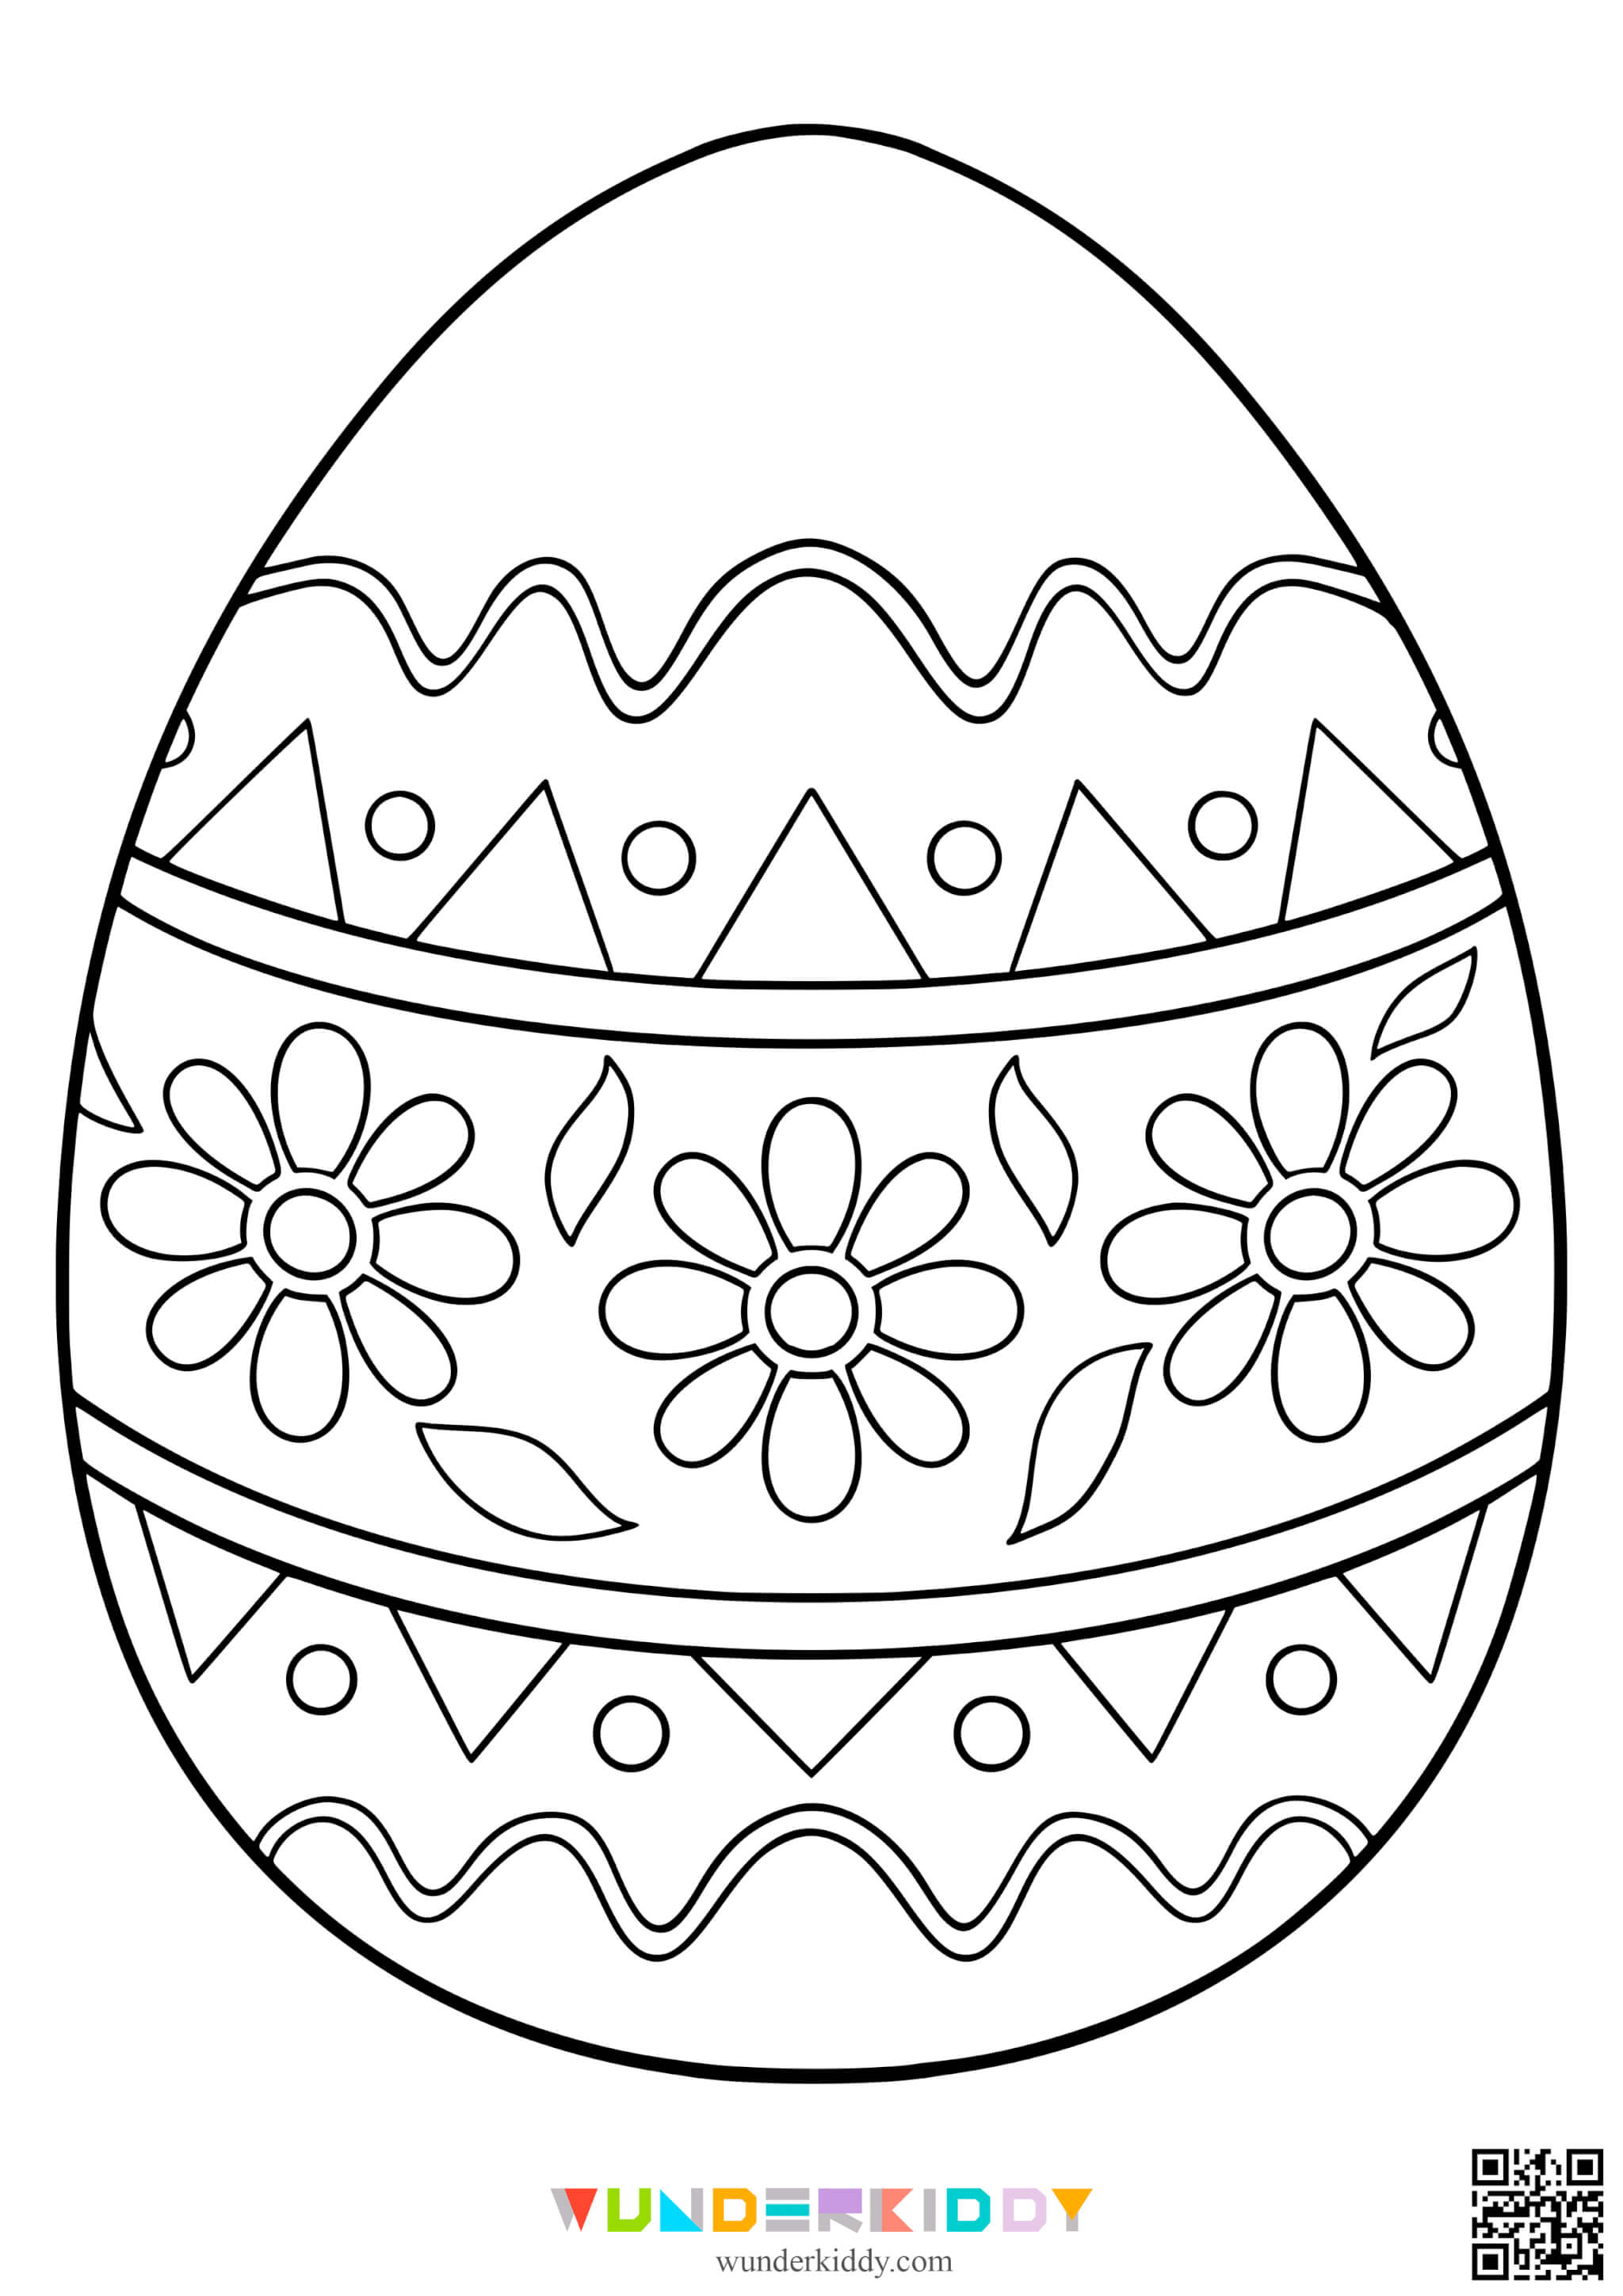 Easter Egg Template Colouring Page - Image 9